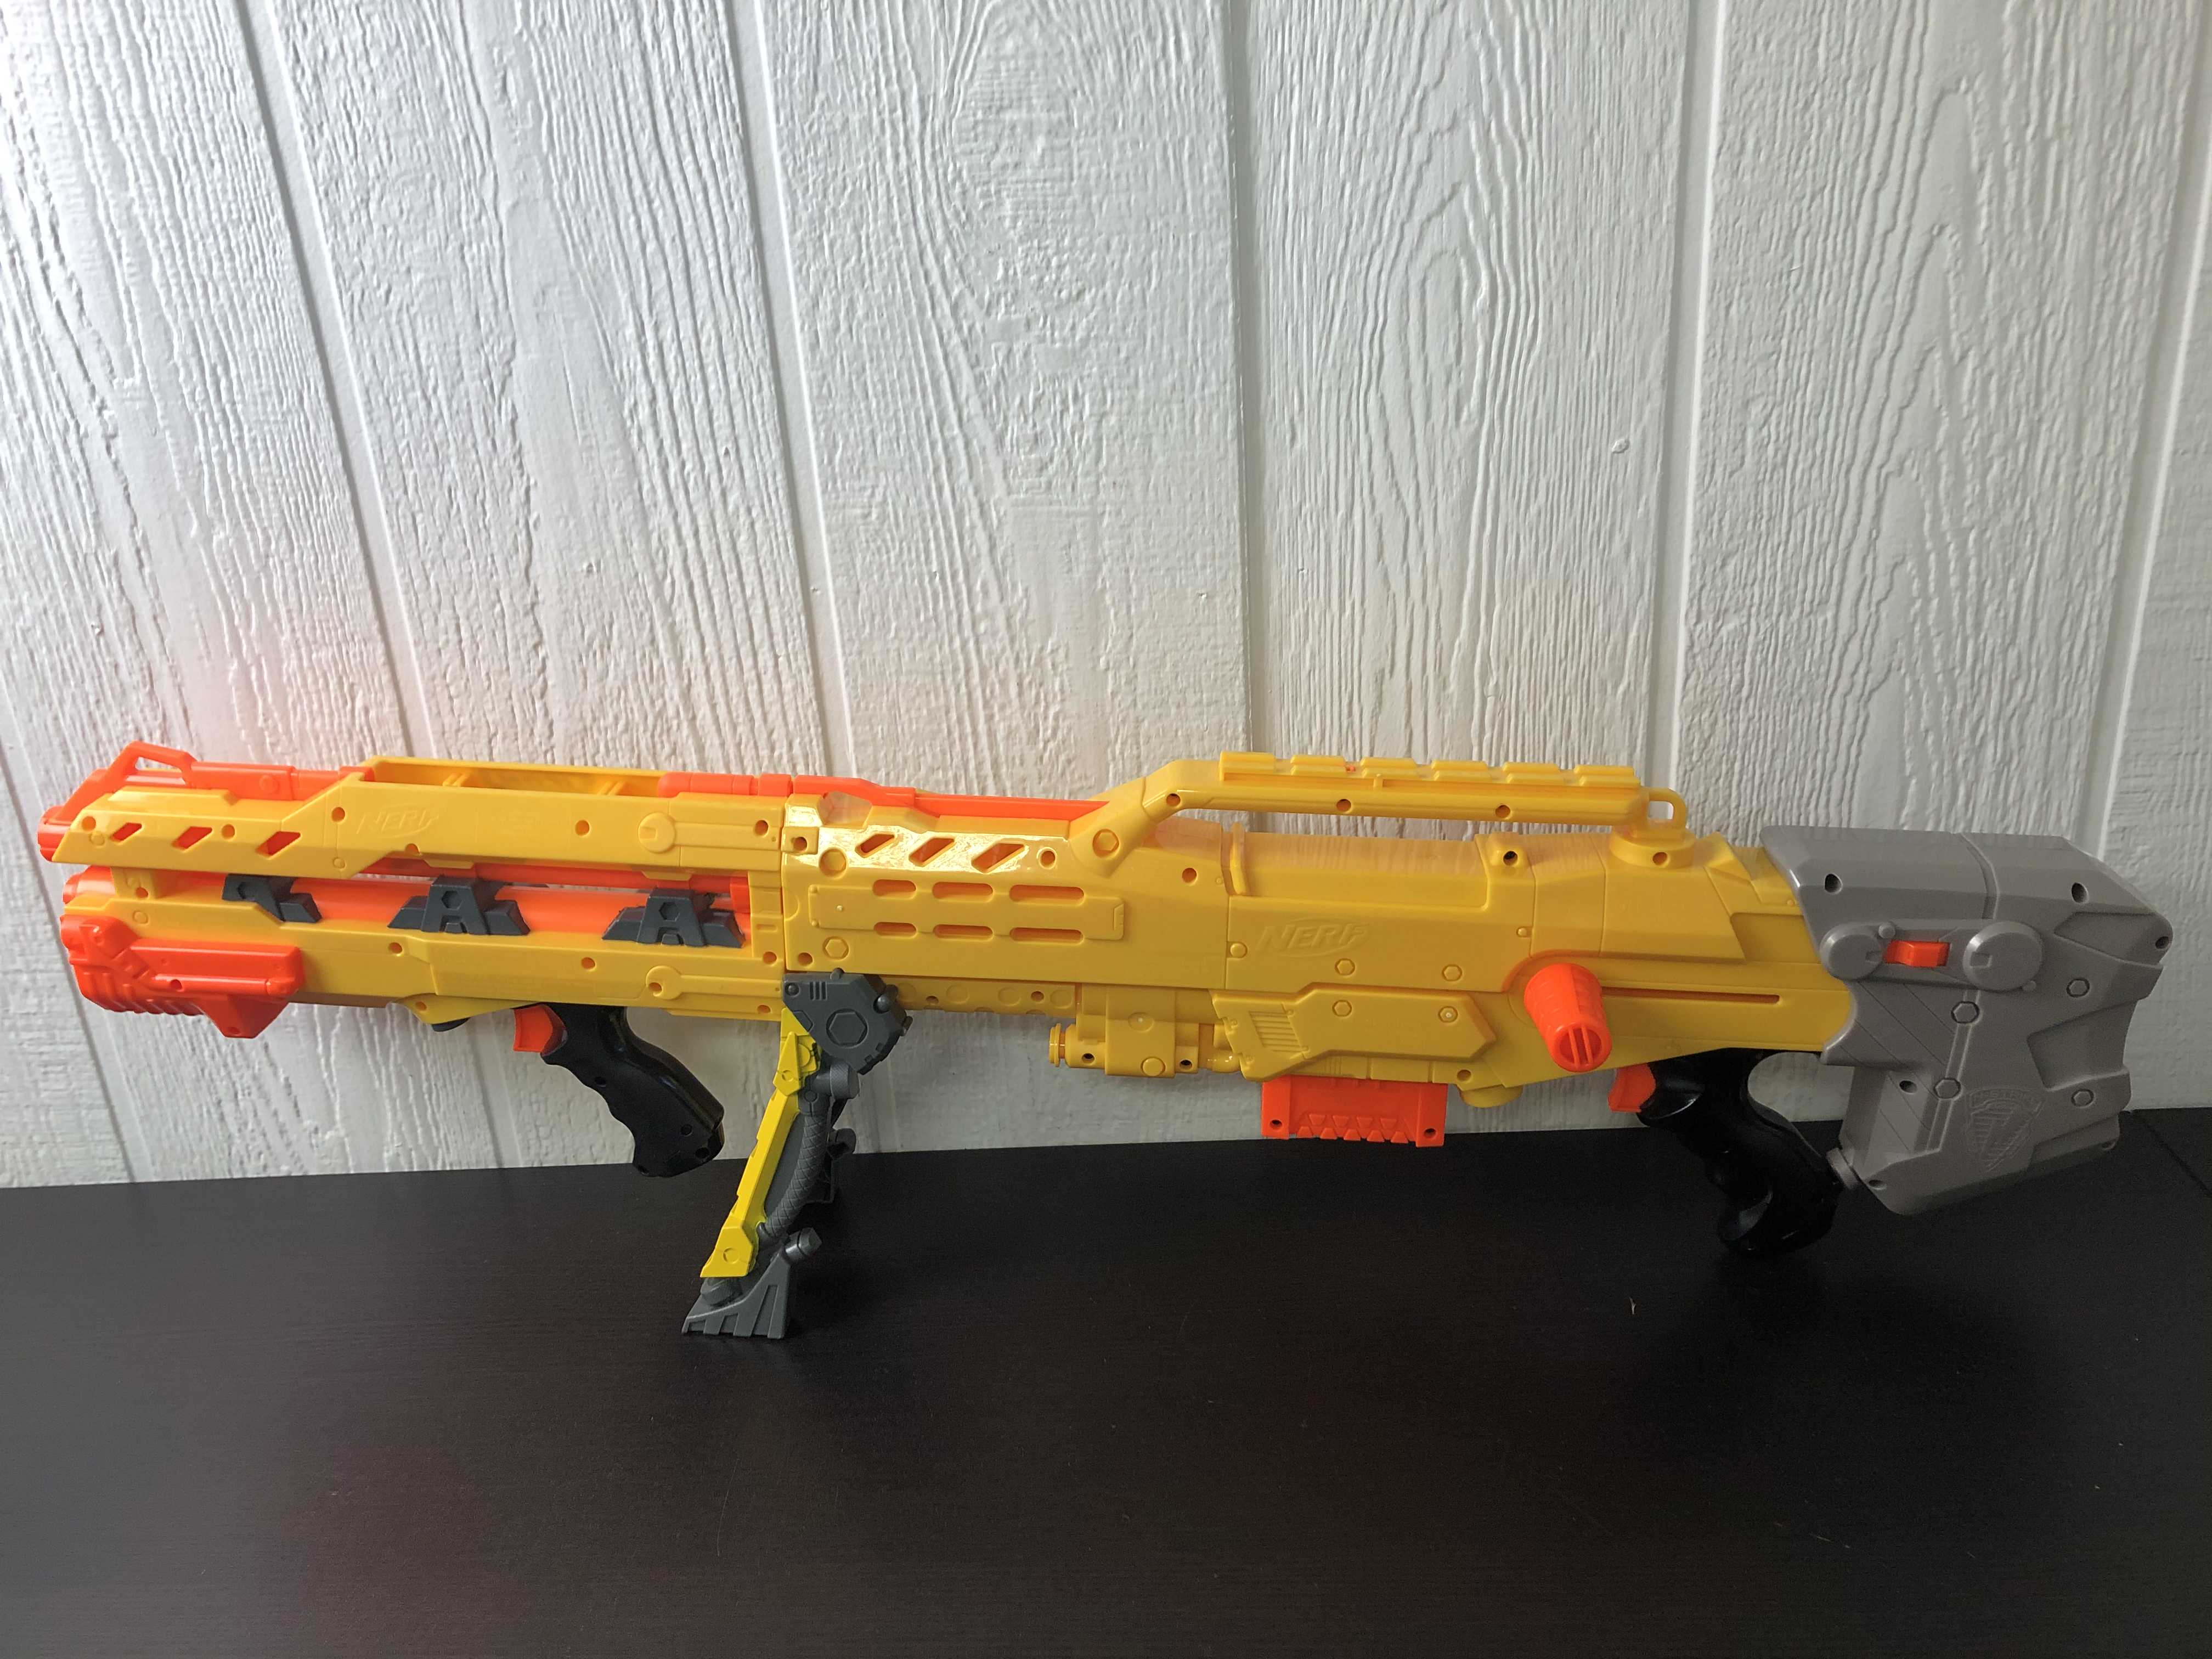 Nerf N-Strike Longshot CS-6 - N-Strike Longshot CS-6 . shop for Nerf  products in India. Toys for 6 - 14 Years Kids.